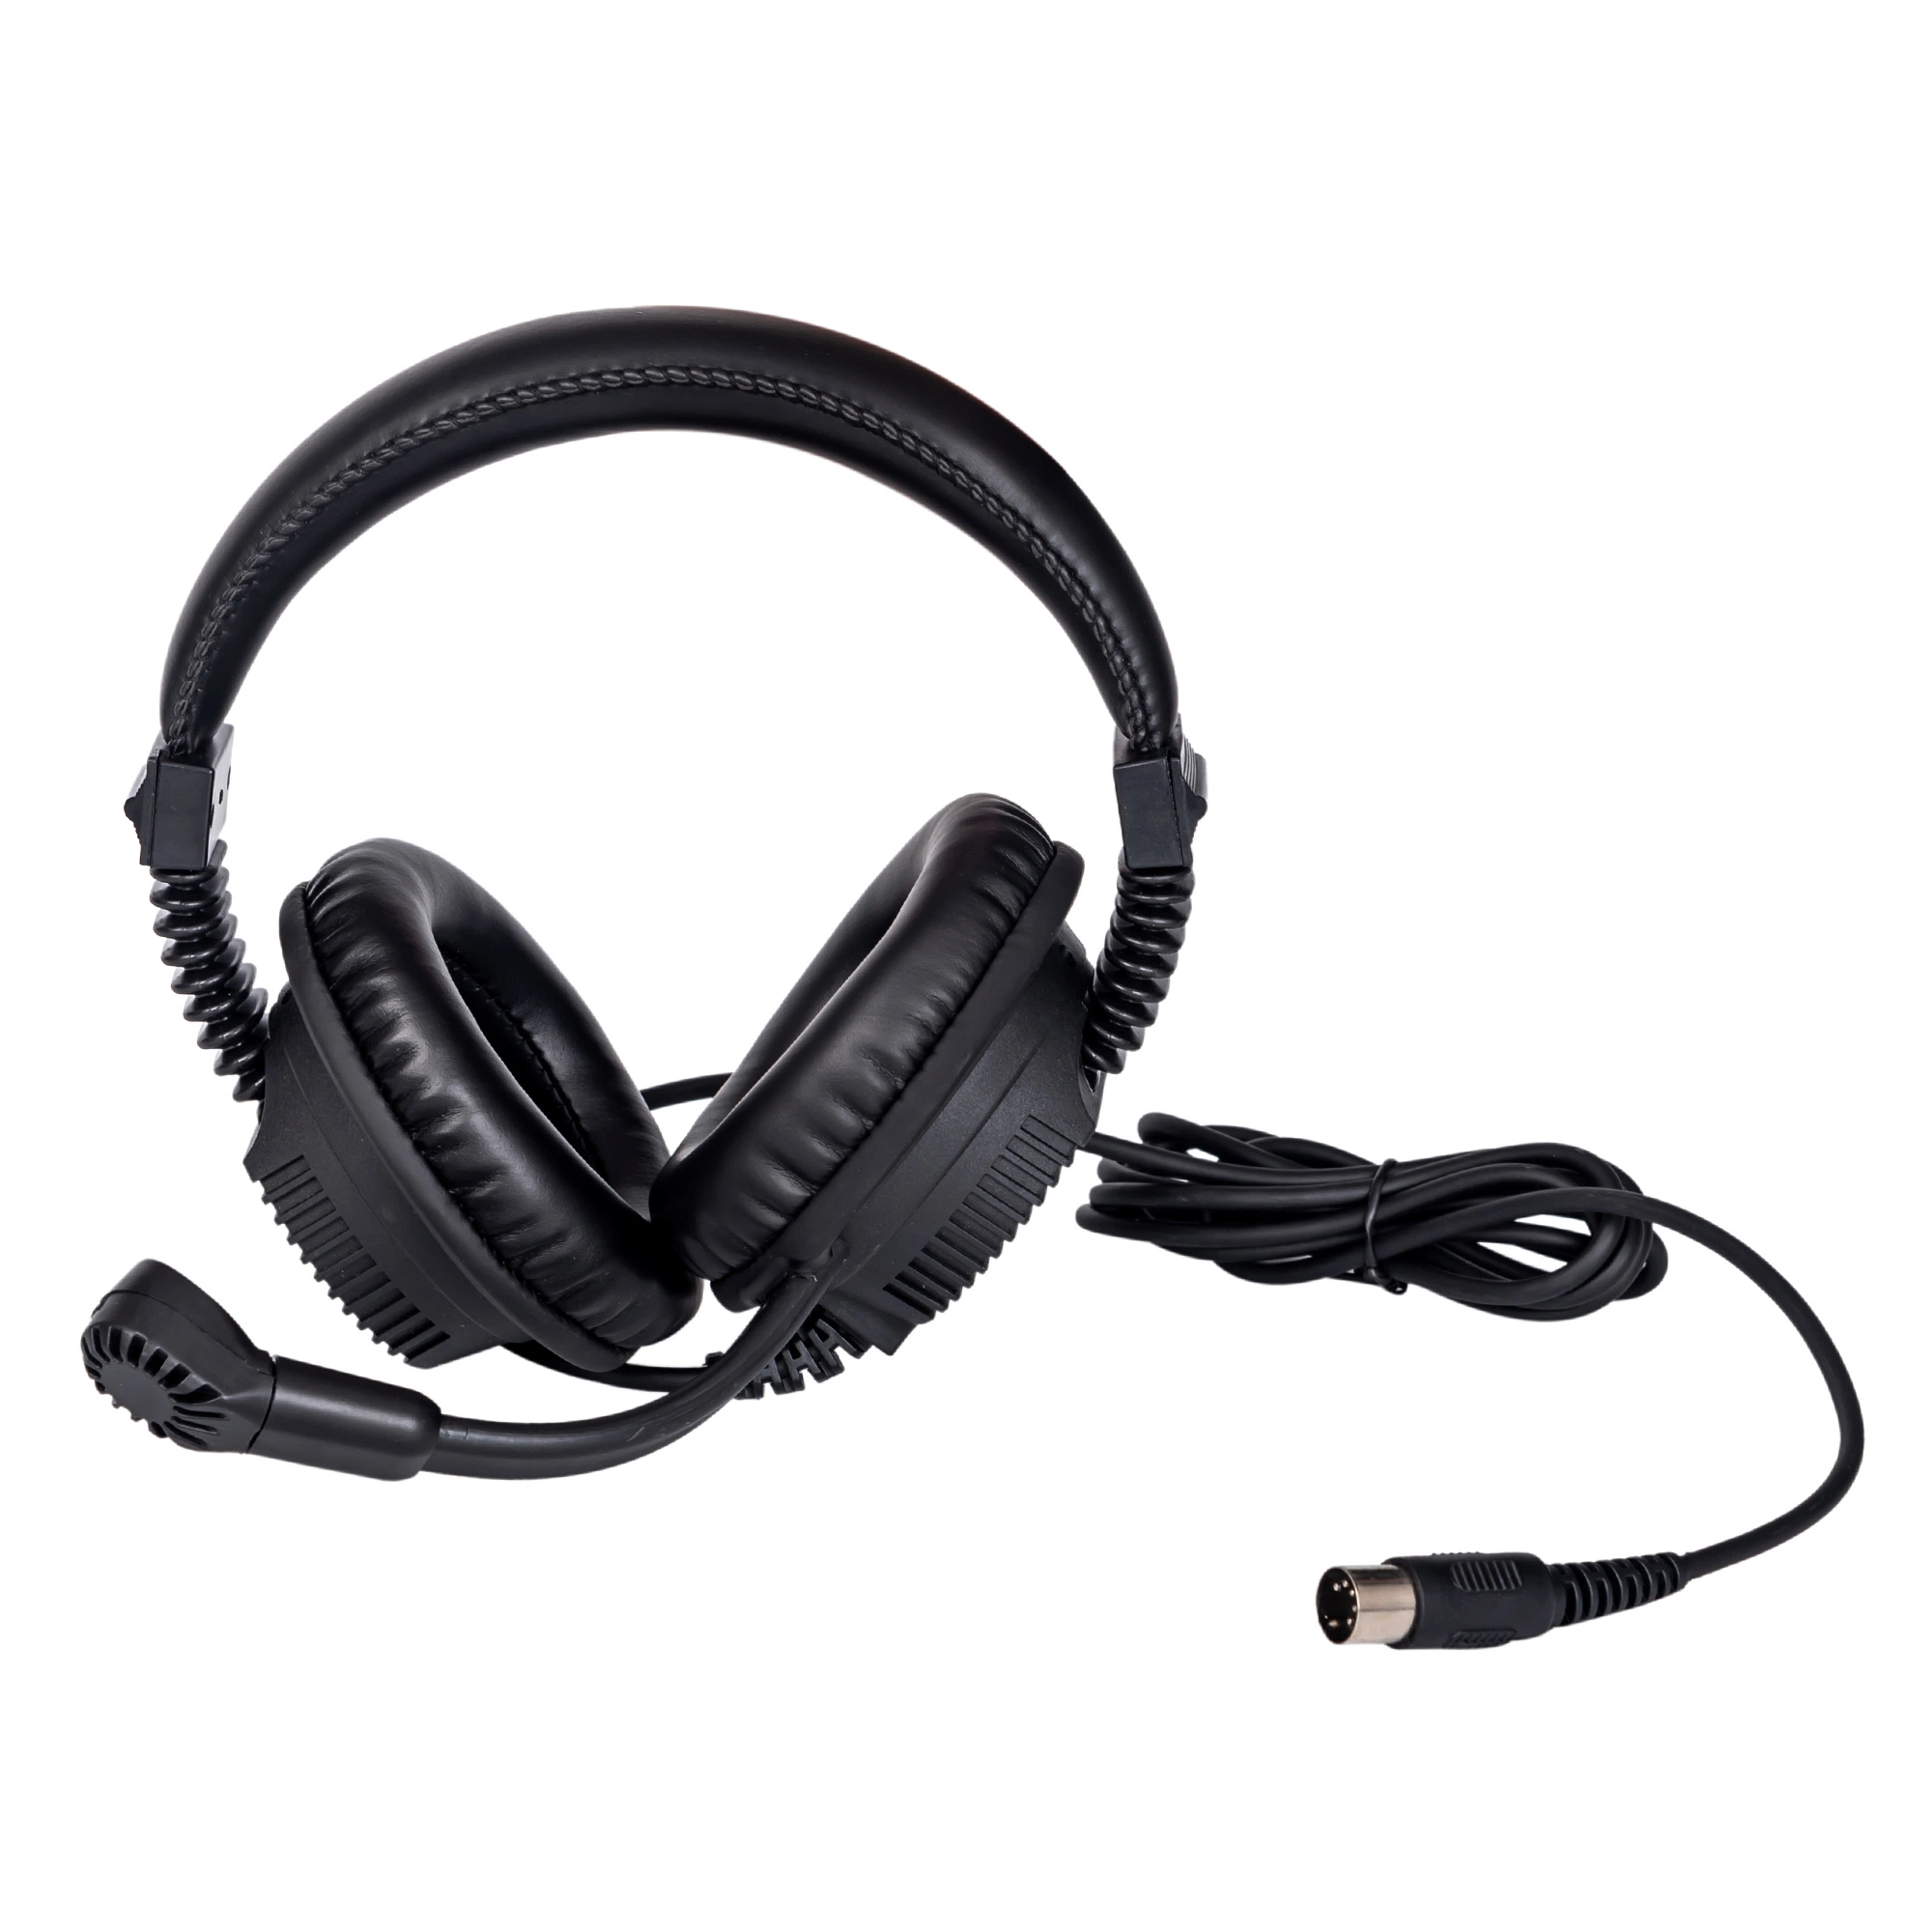 Headset 3.5mm Language Lab Headset Headphone Custom Logo Wireless Available for Language Computer Promo OEM Cable Noise Cancelling Professional Xrl